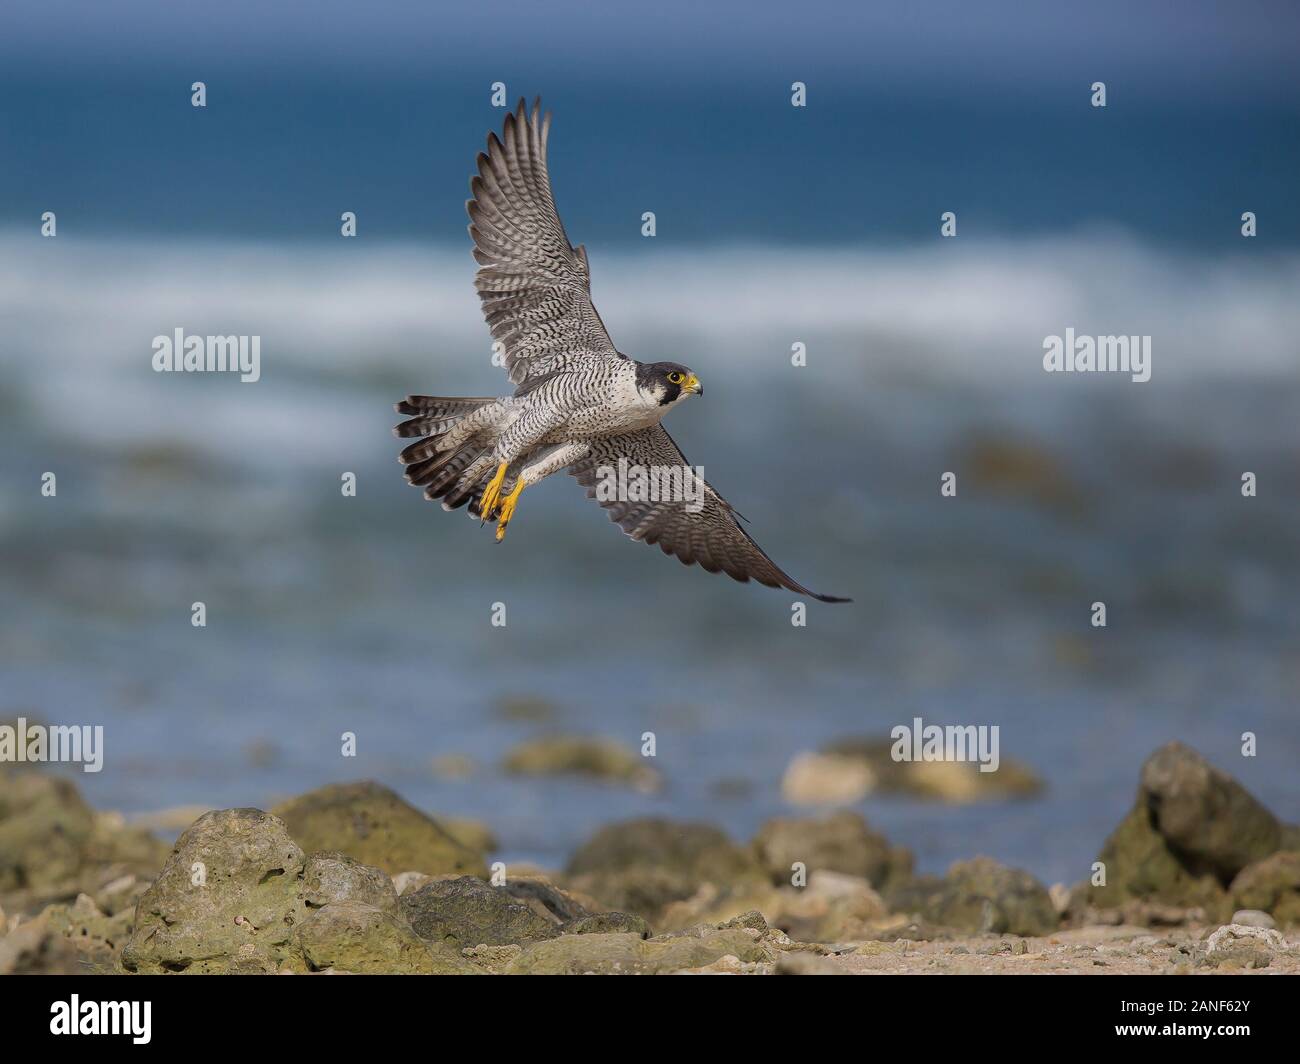 An adult Peregrine falcon flashes by as it searches for its next meal,Thailand Stock Photo